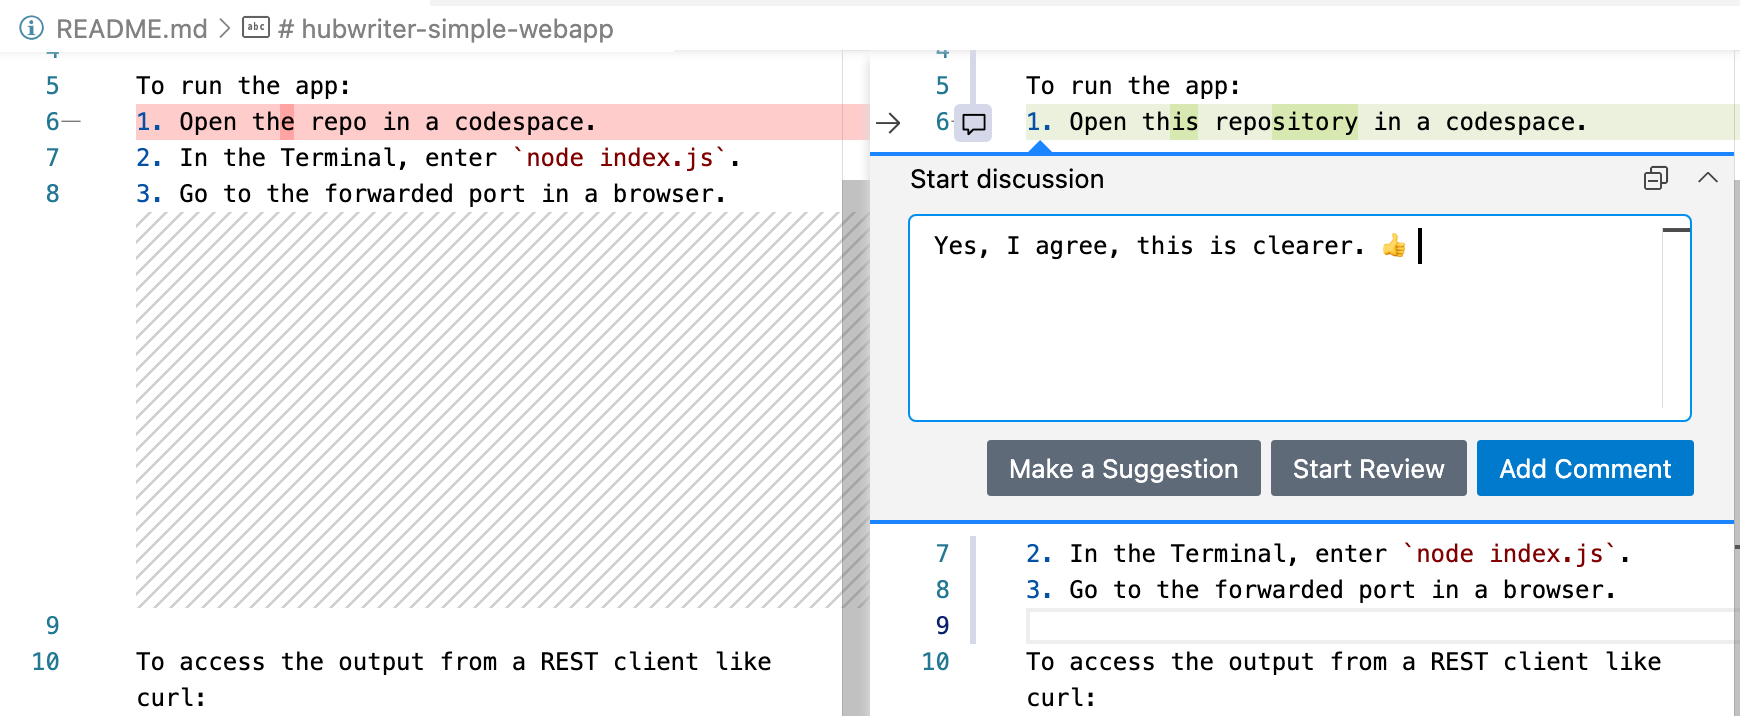 Option to open PR in a codespace